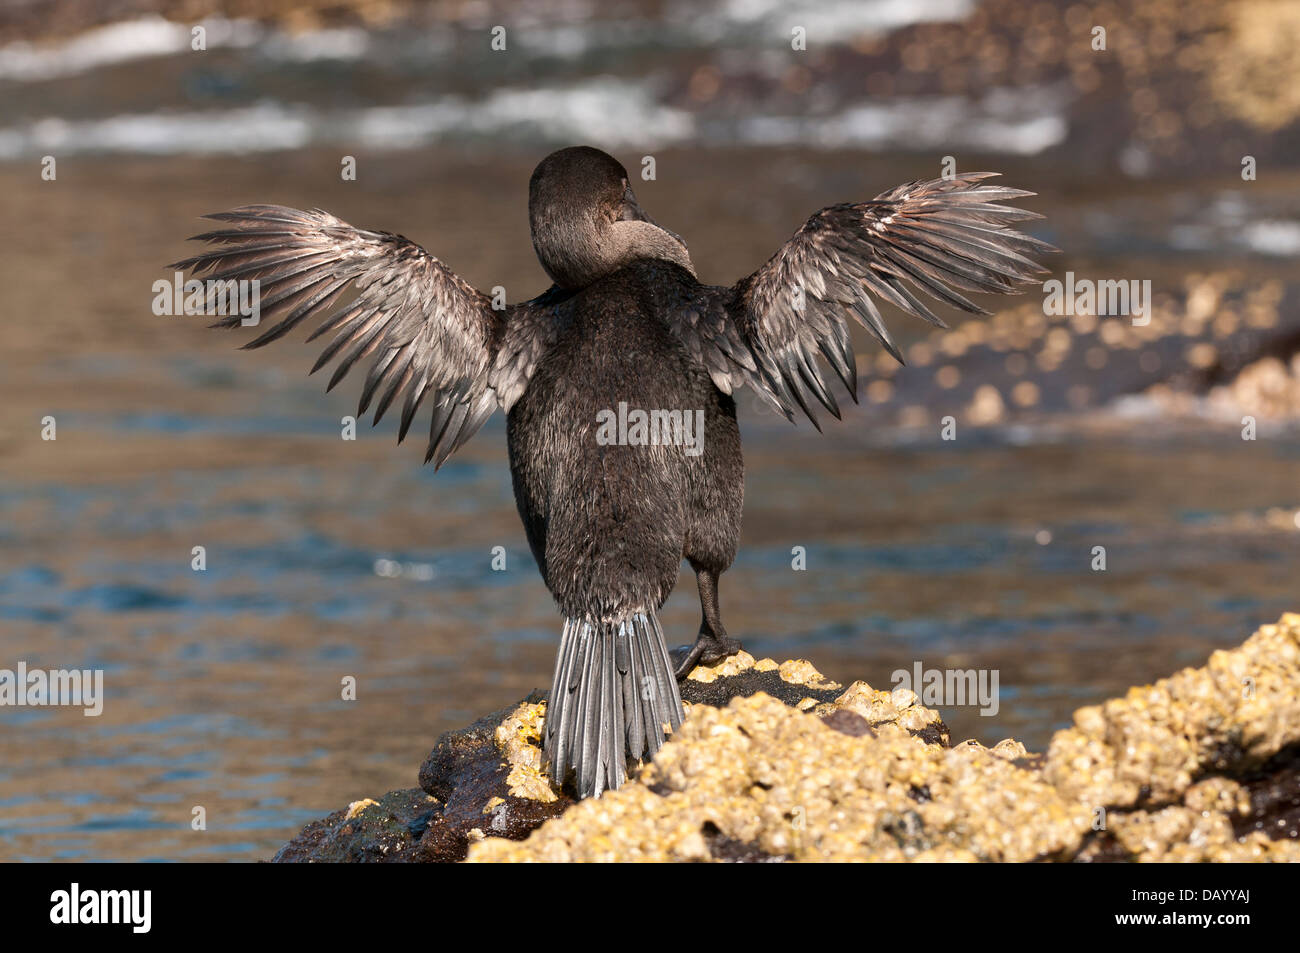 Stock photo of a flightless cormorant displaying his small wings. Stock Photo